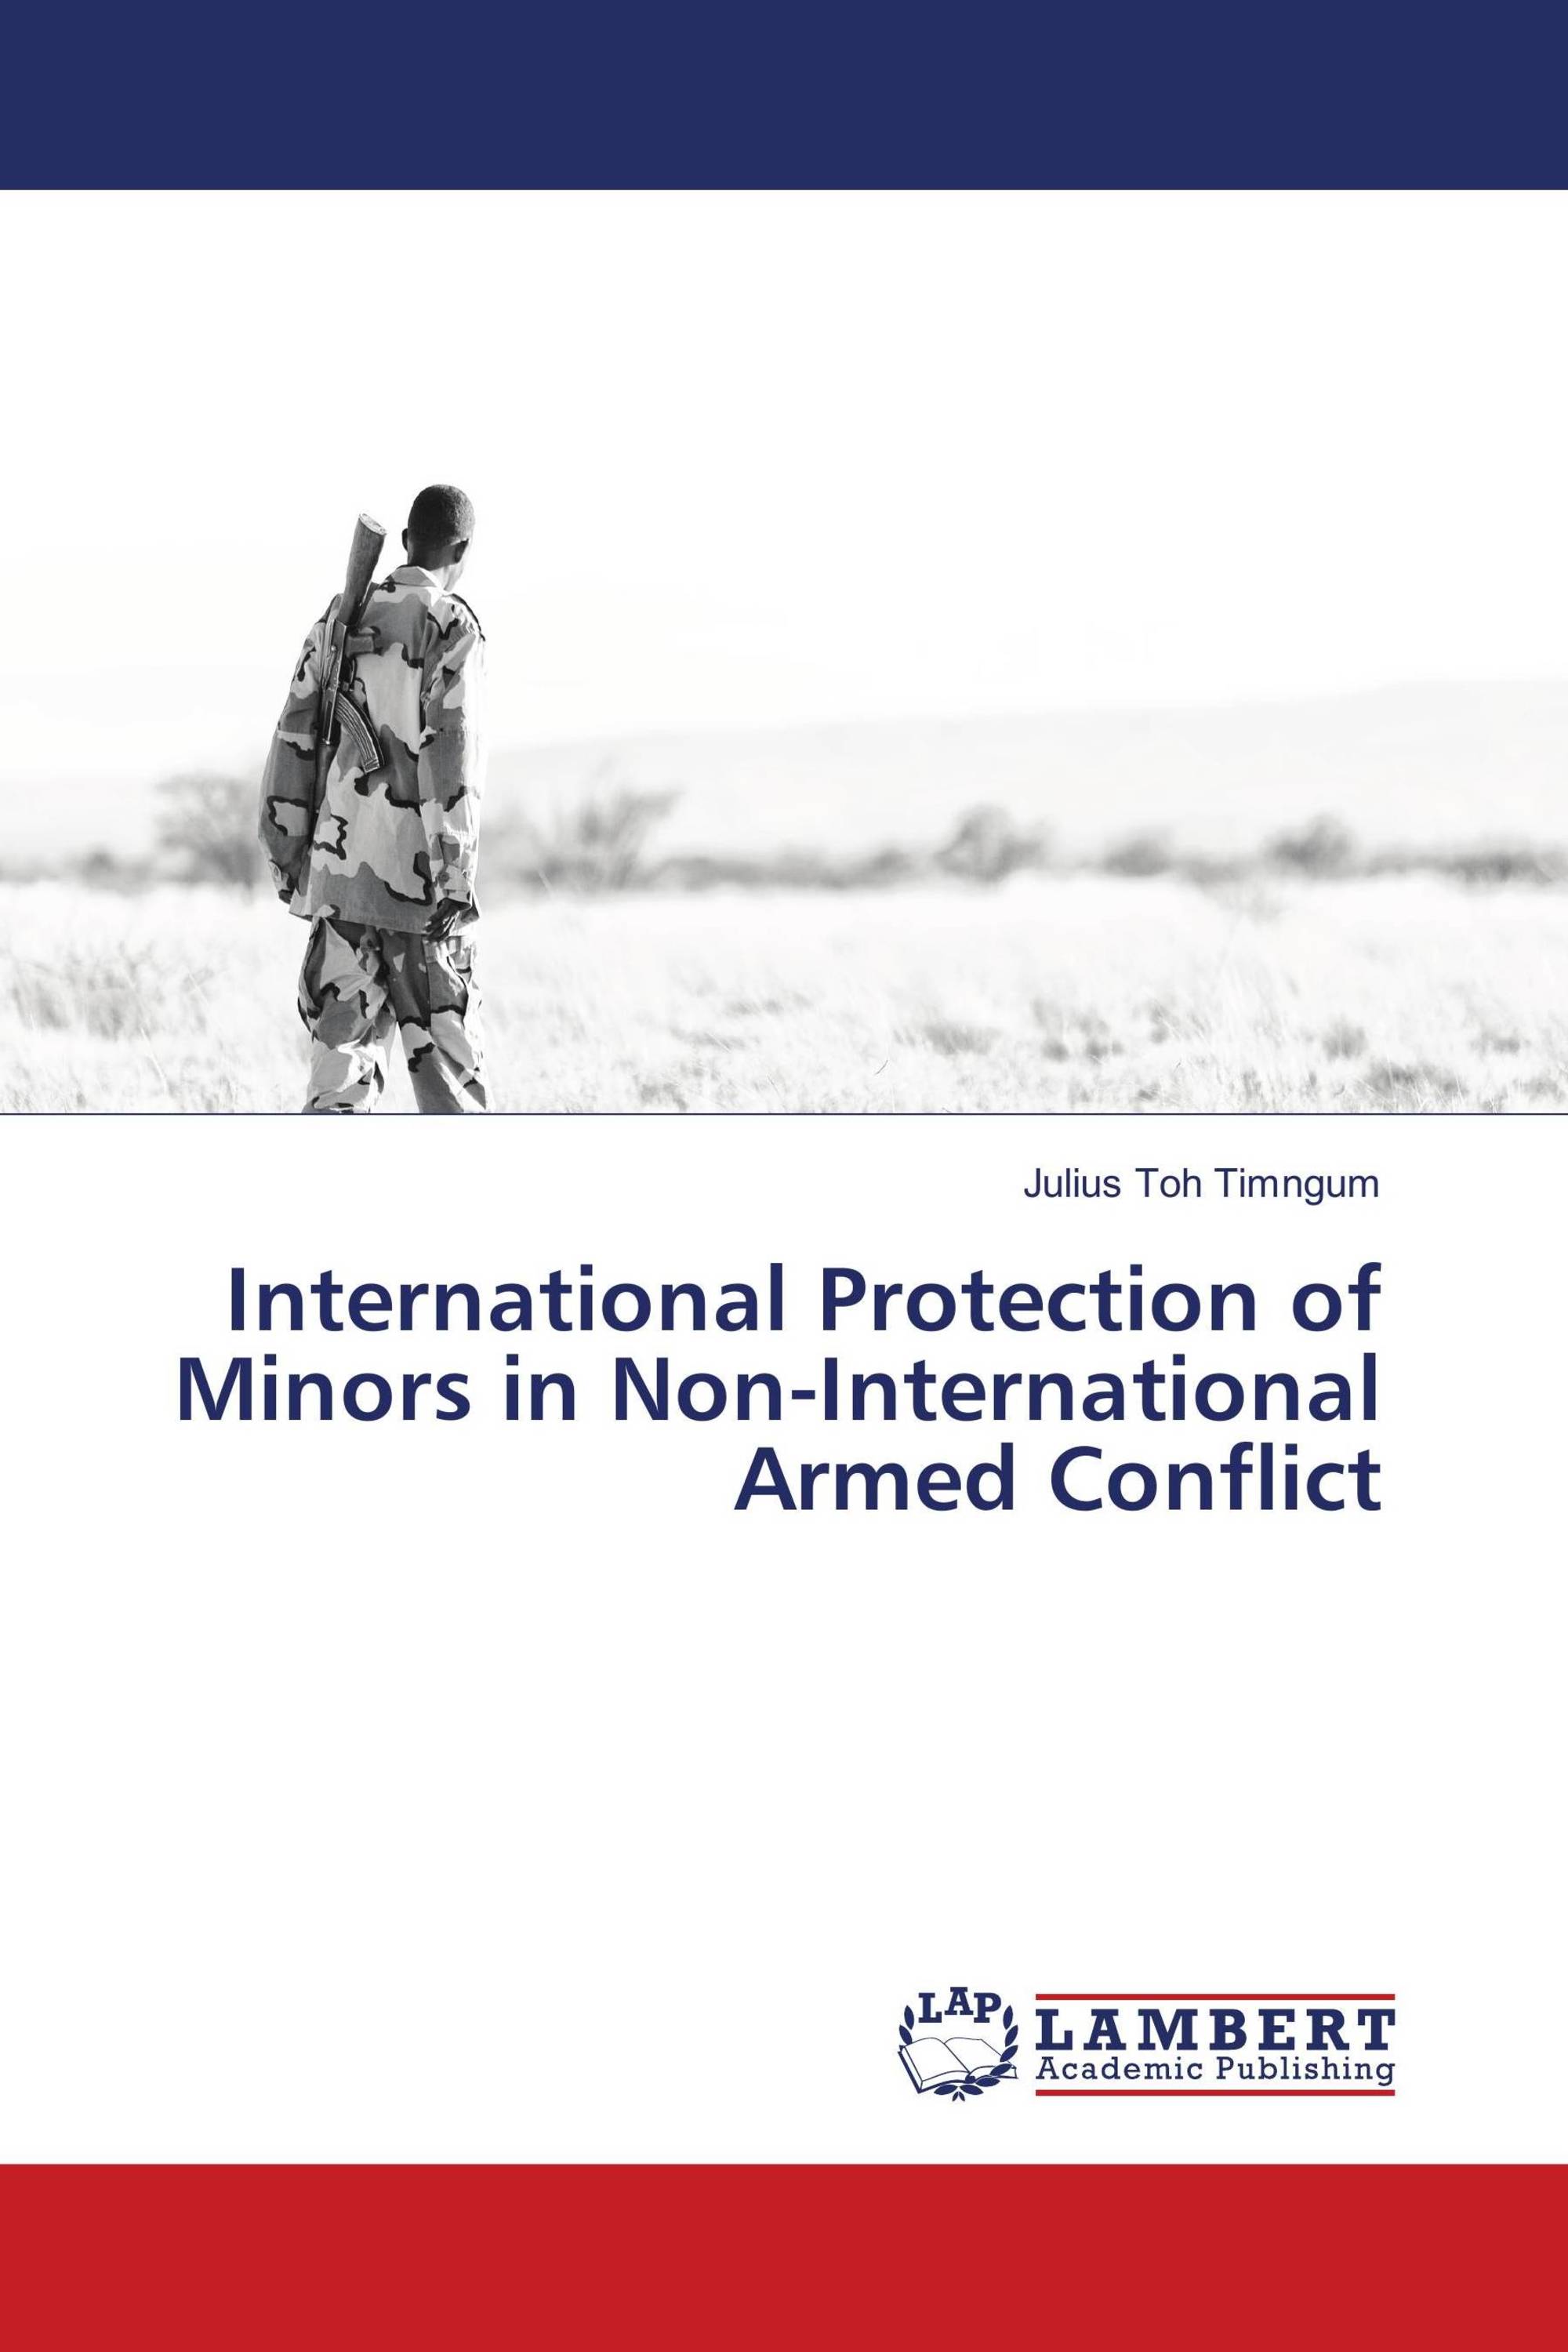 mexico and the protection for children impacted by armed conflict in the middle east